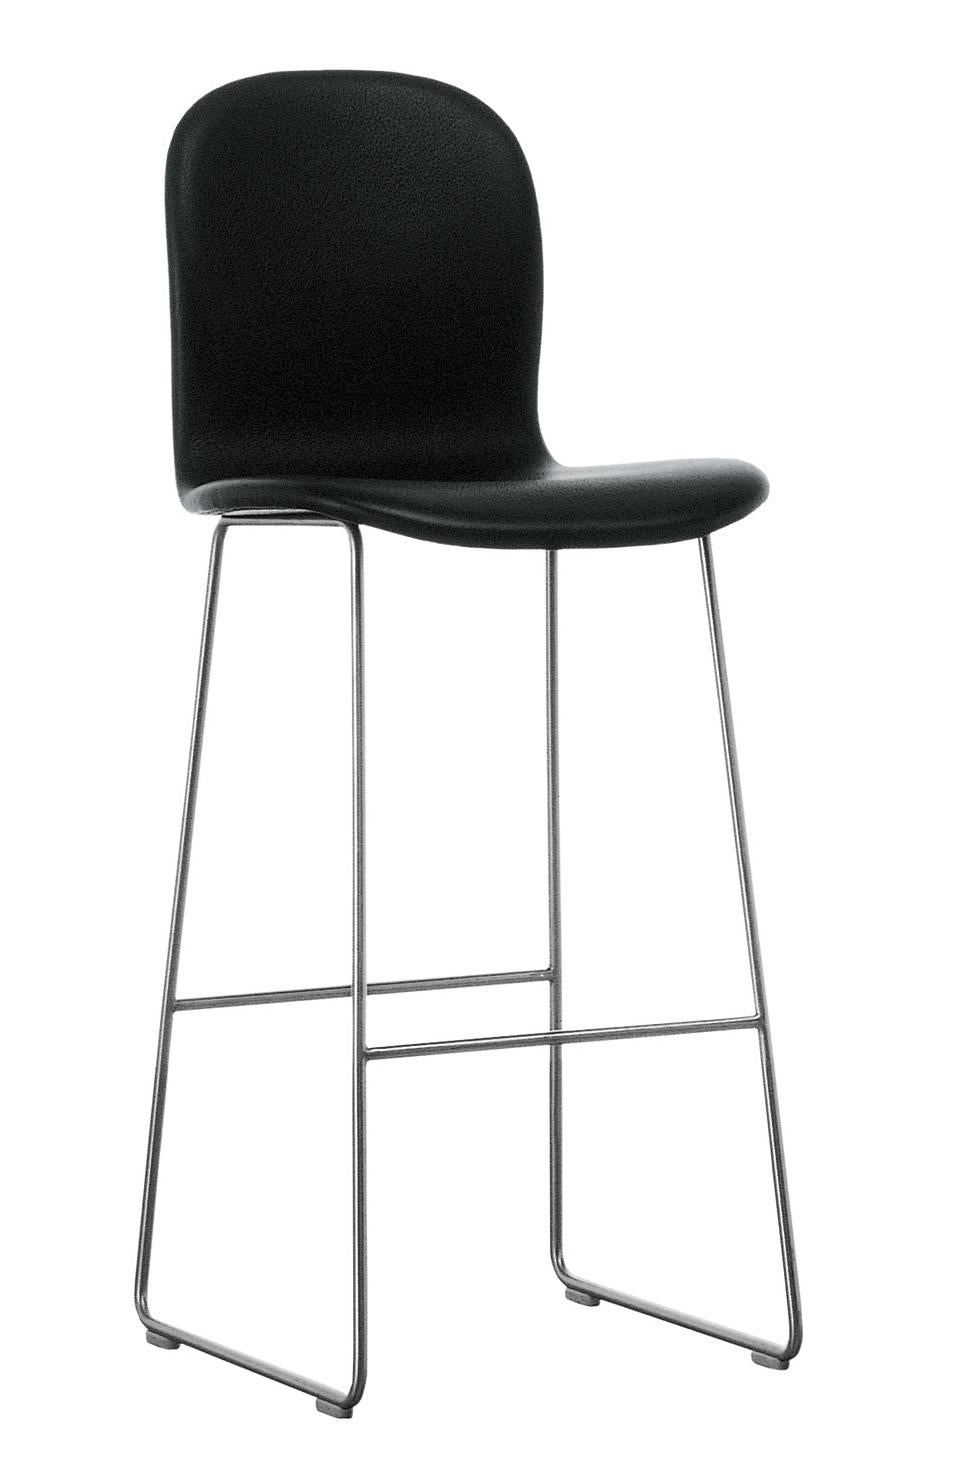 For Sale: Black (Leather 908) Jasper Morrison Tate Stool Upholstered in Fabric or Leather for Cappellini